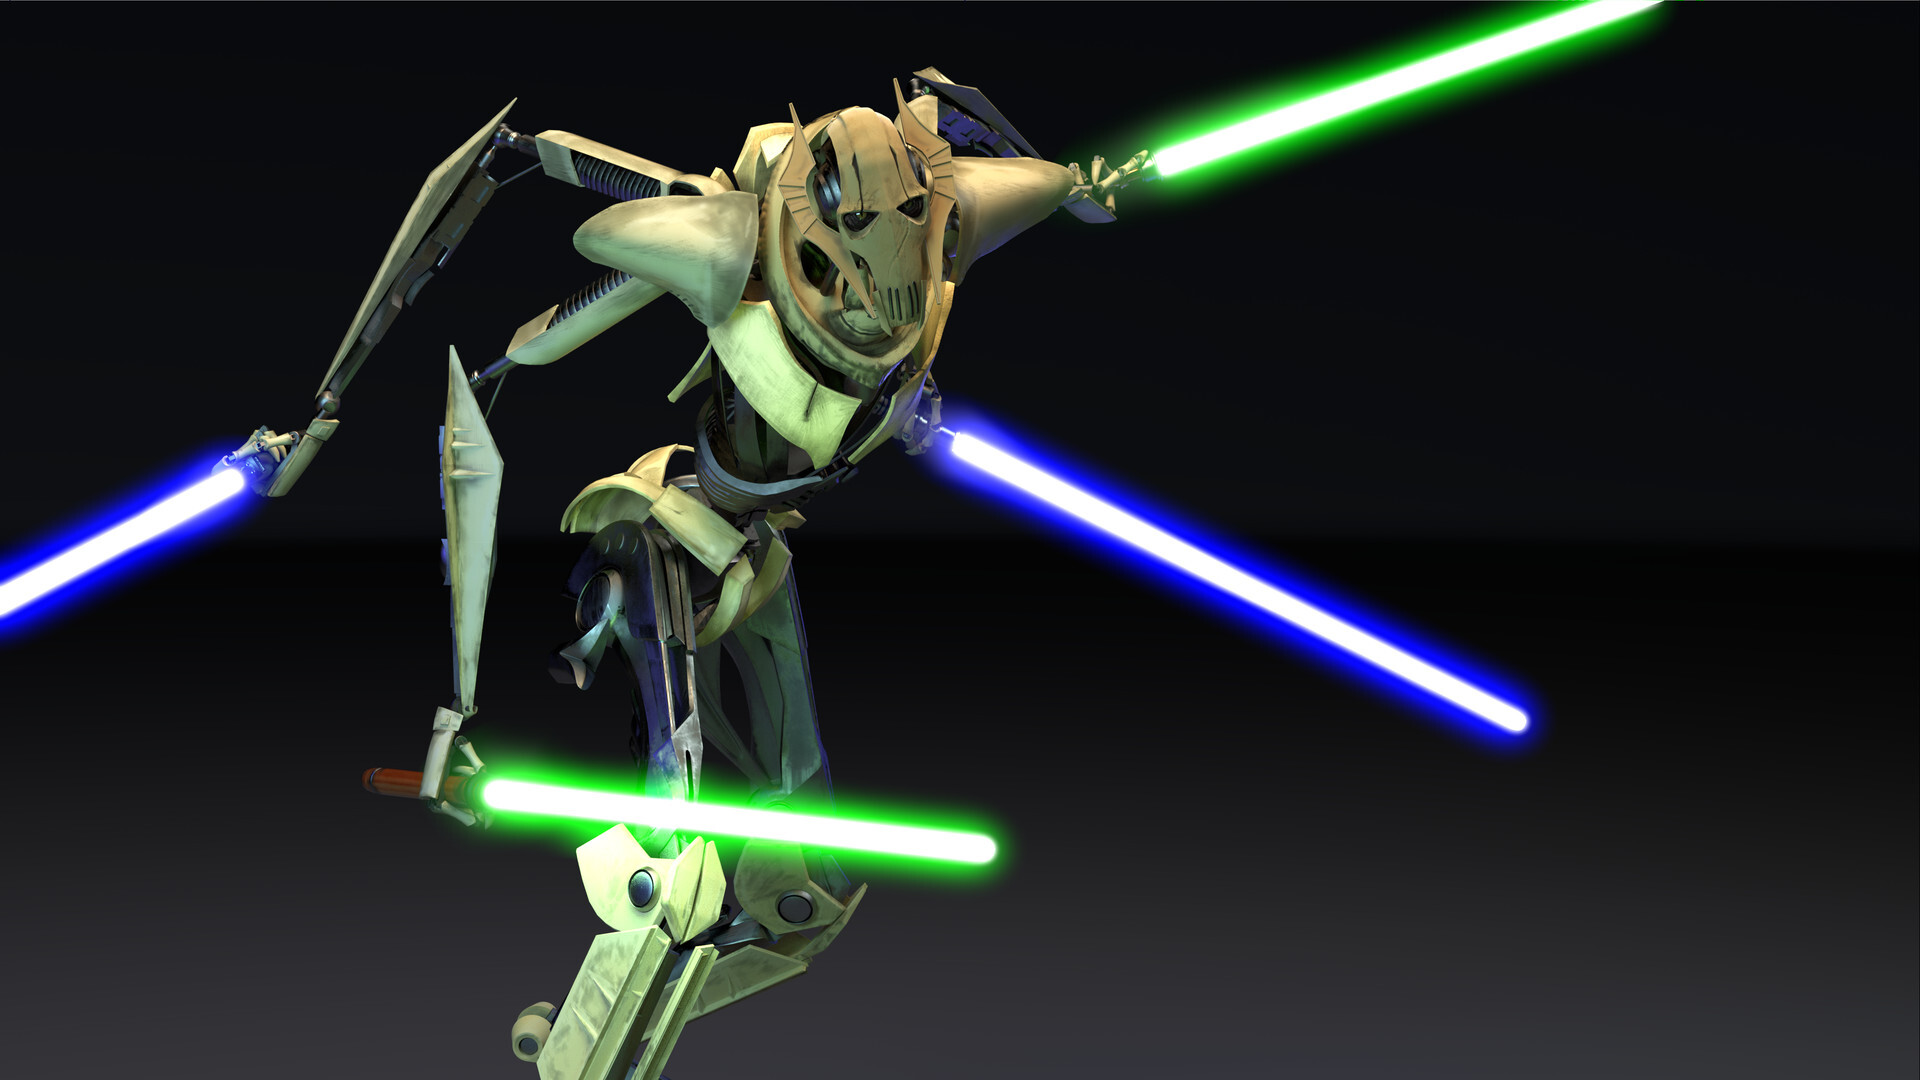 General Grievous: Four arms, Extreme and barbaric actions in the war, The Kaleesh, A race of warriors. 1920x1080 Full HD Wallpaper.